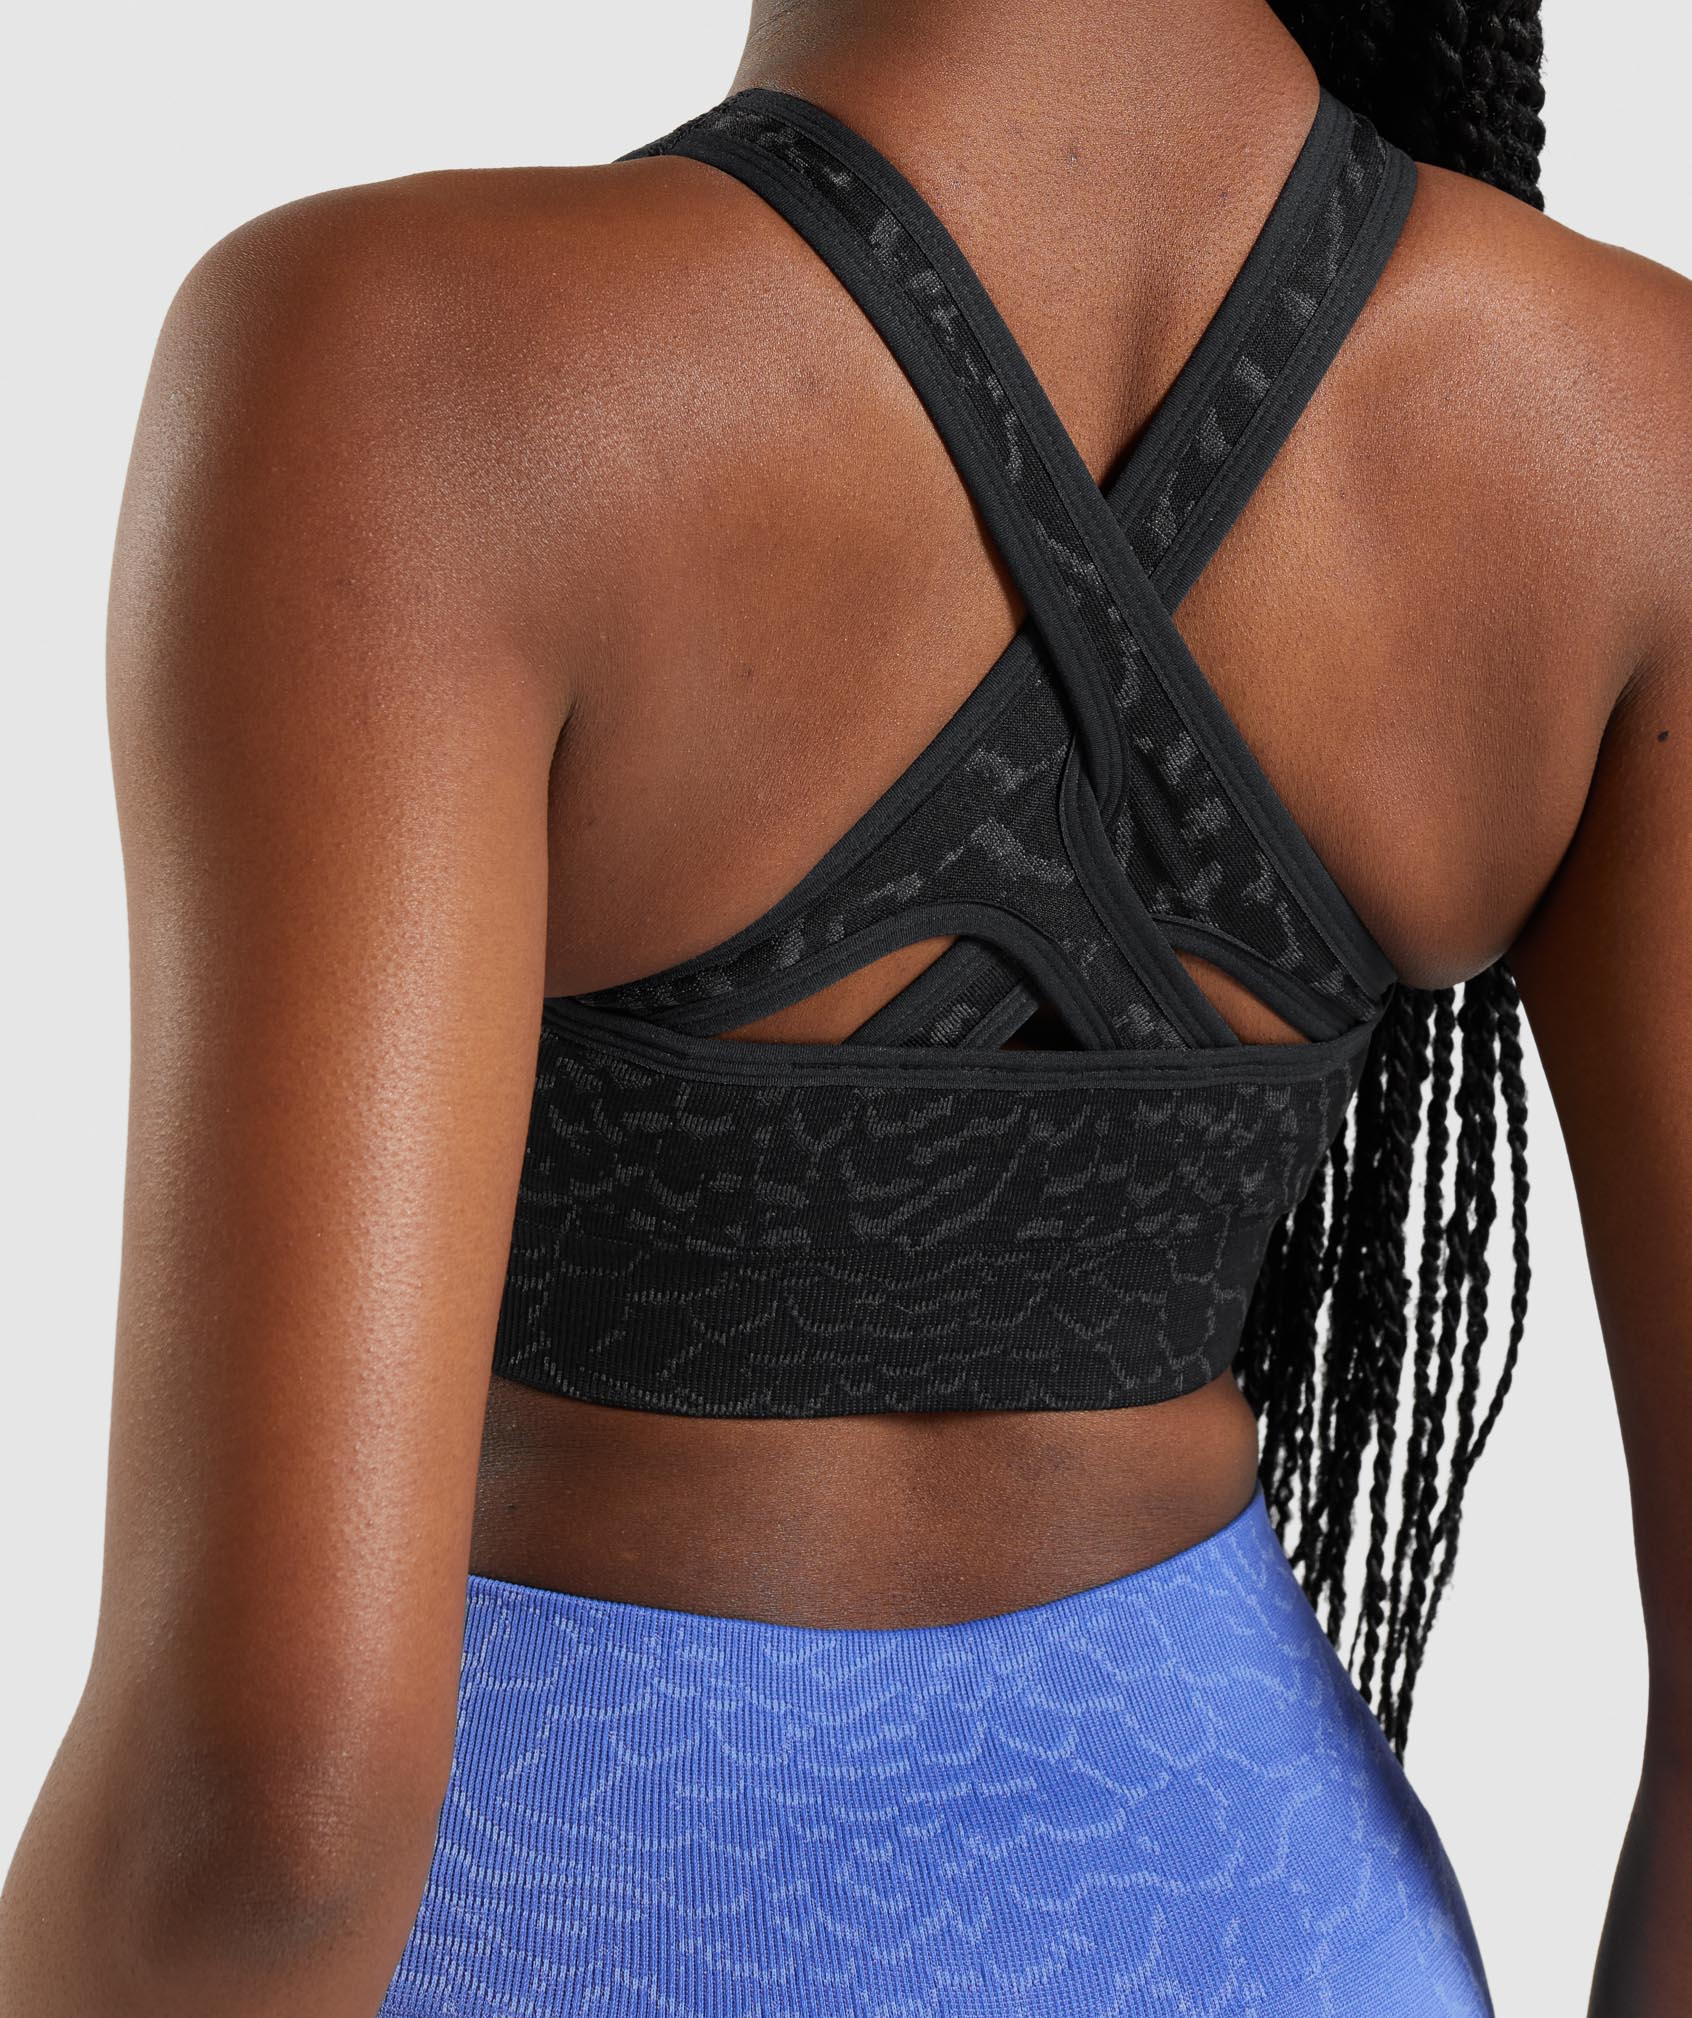 Get Active with the Gymshark Adapt Animal Seamless Sports Bra